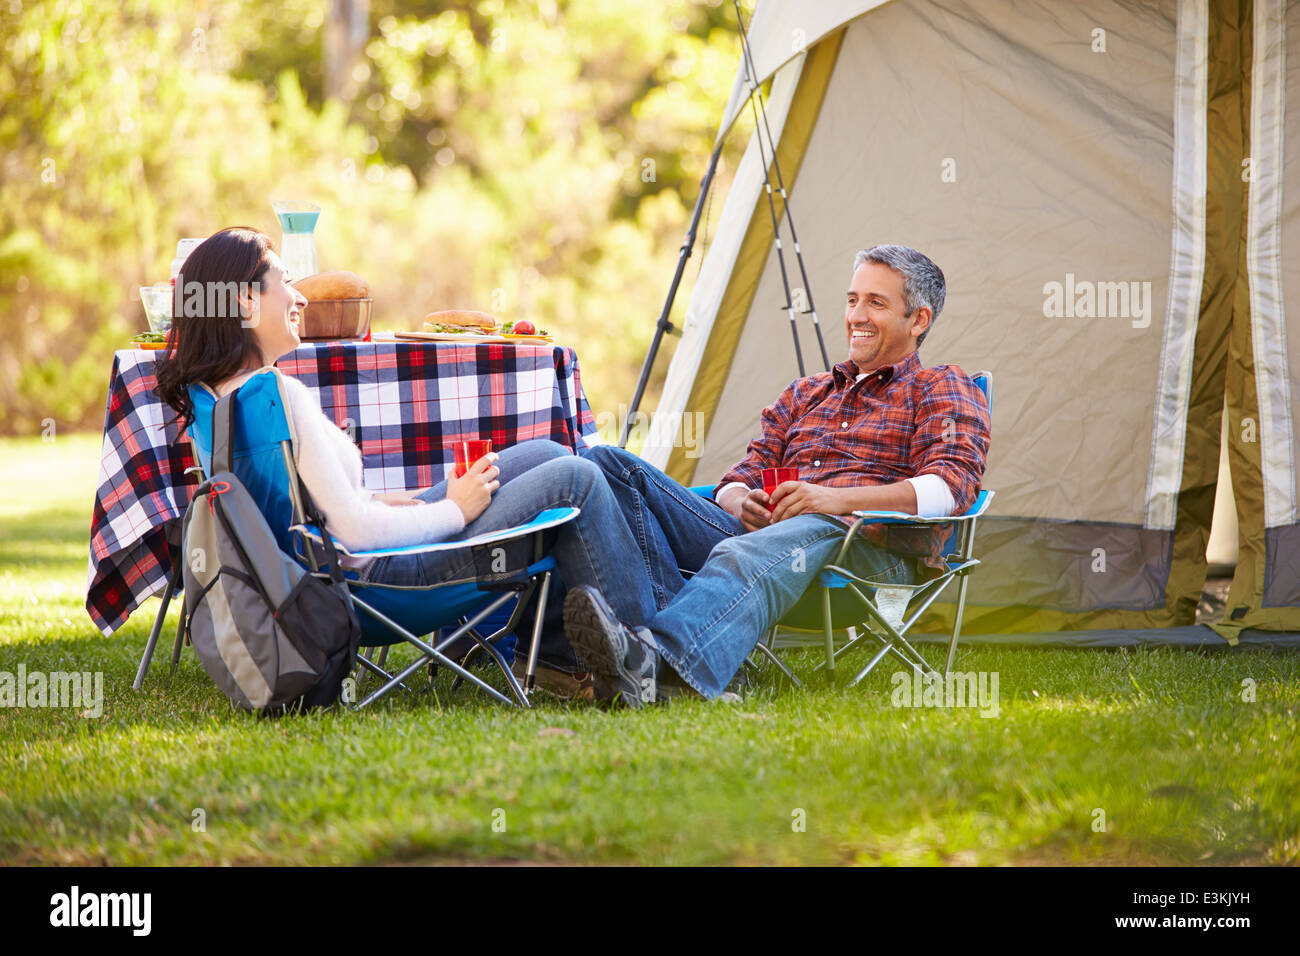 Couple Enjoying Camping Holiday In Countryside Stock Photo